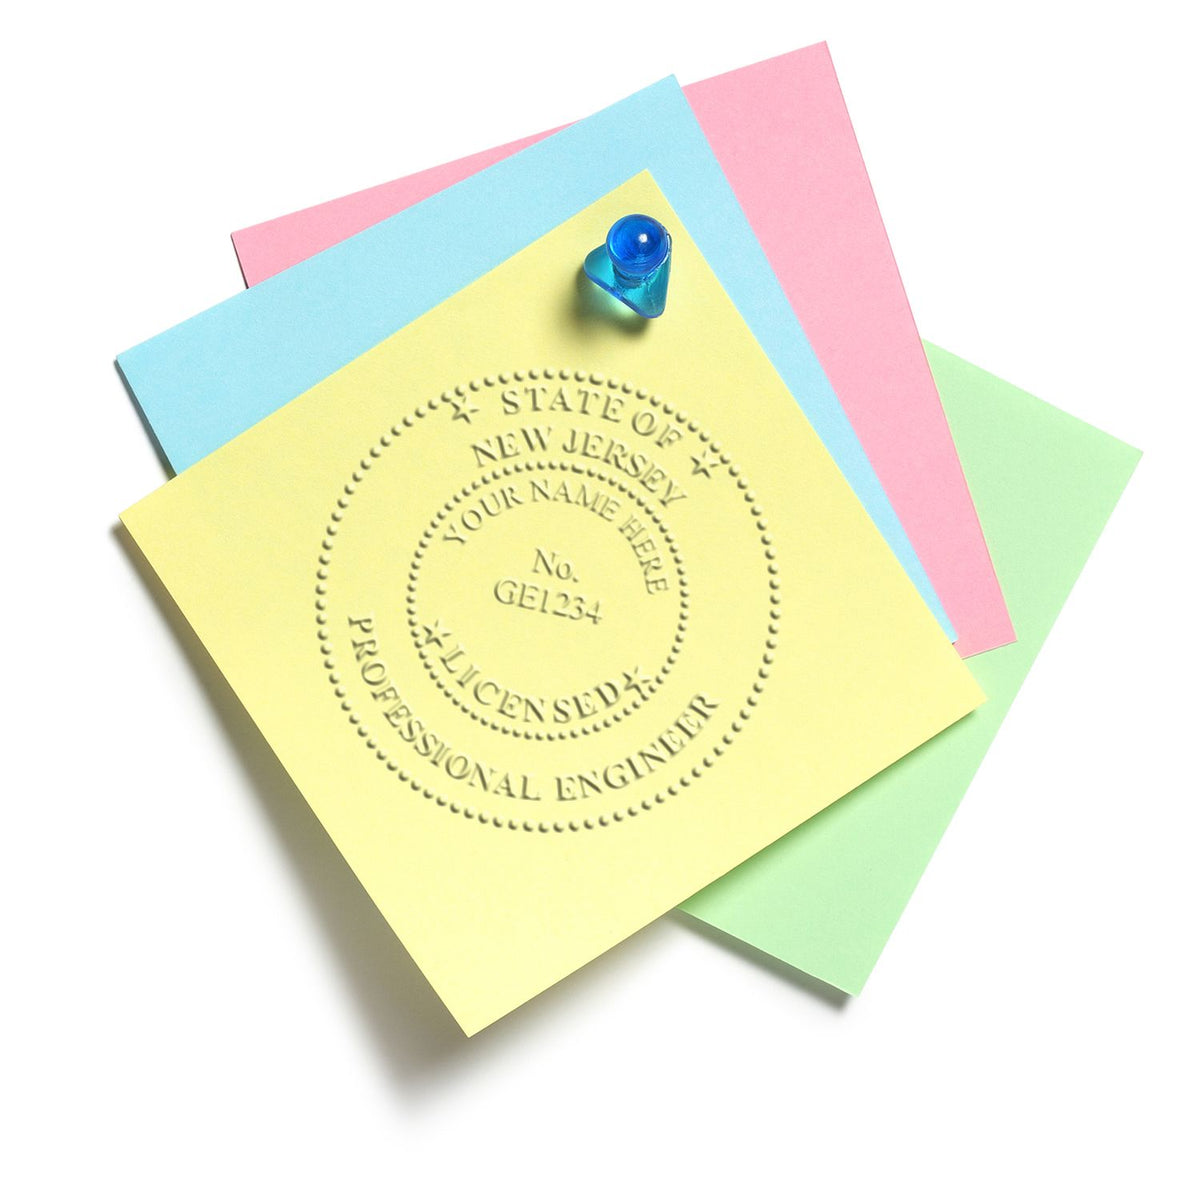 This paper is stamped with a sample imprint of the New Jersey Engineer Desk Seal, signifying its quality and reliability.